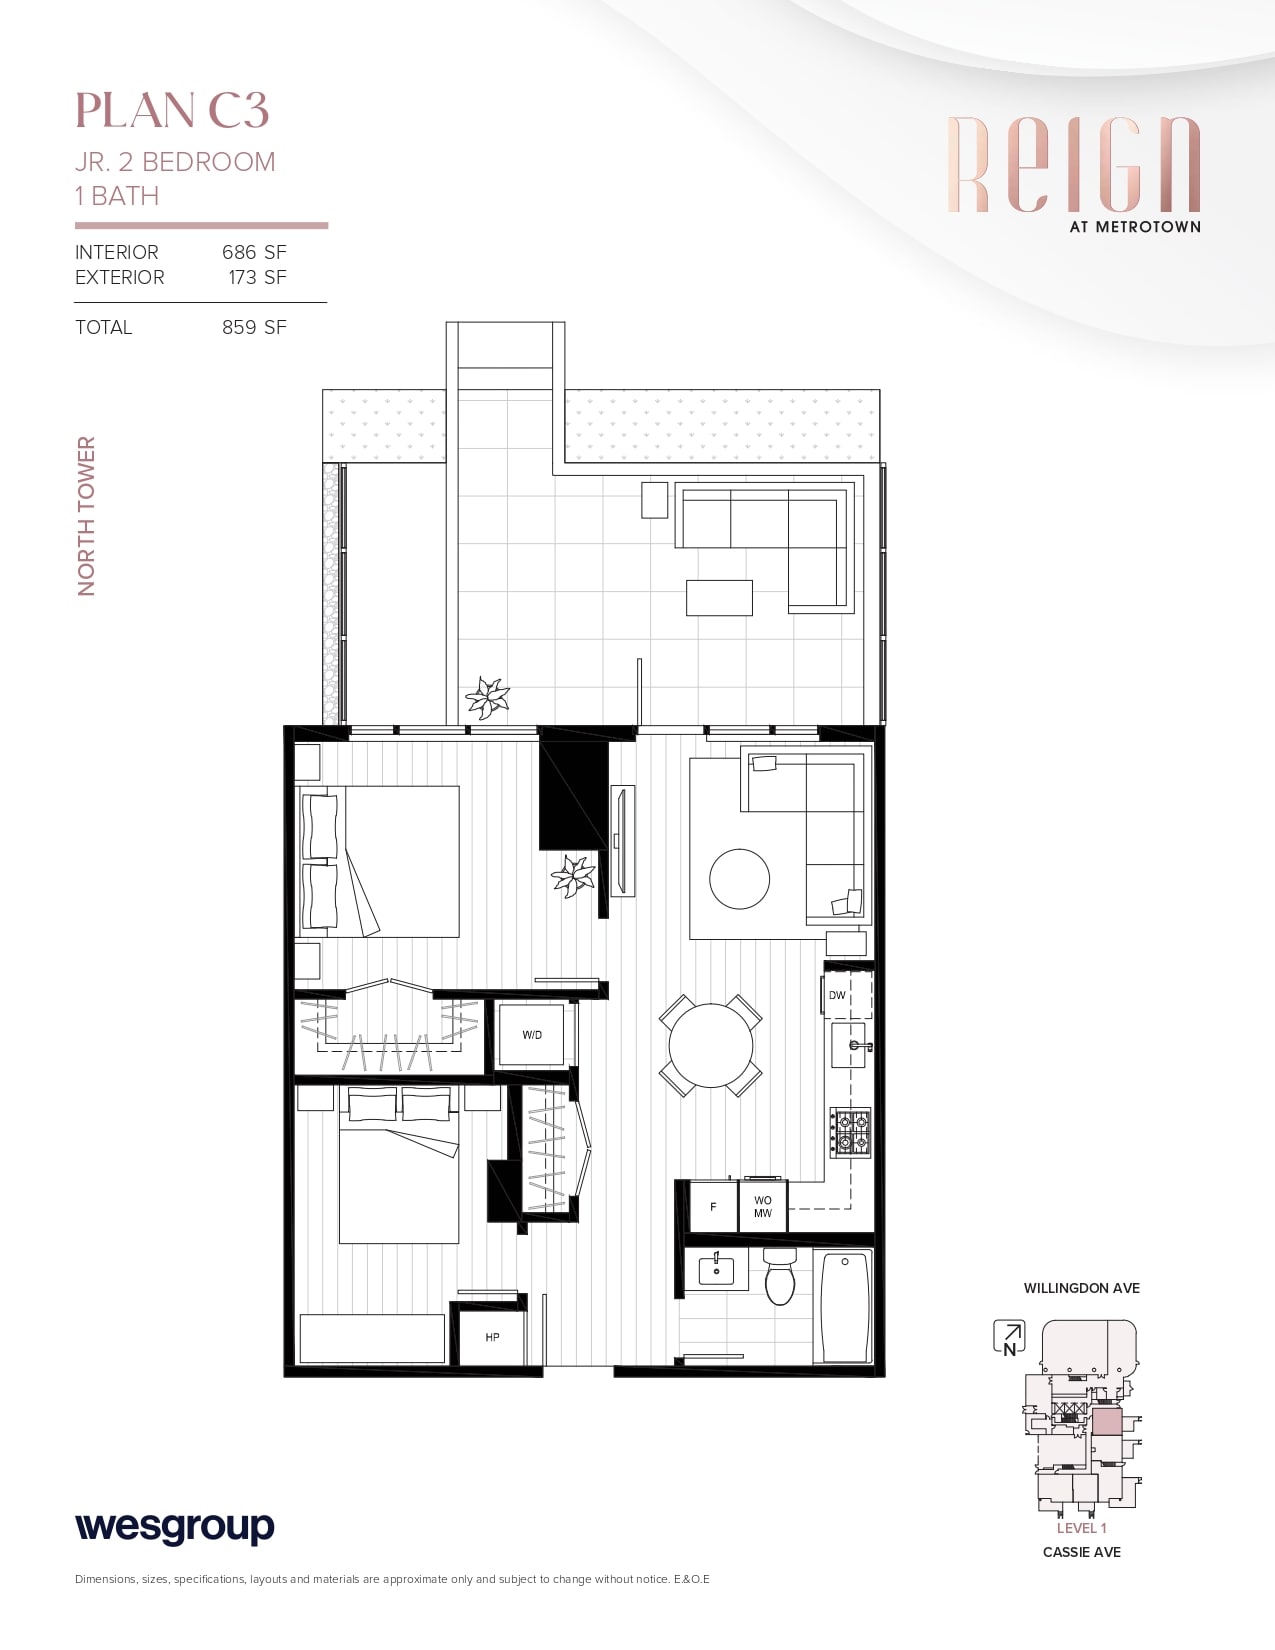 Reign_-_North_Tower_-_Typical_Floorplans_-_FINAL__page-0010-min.jpg